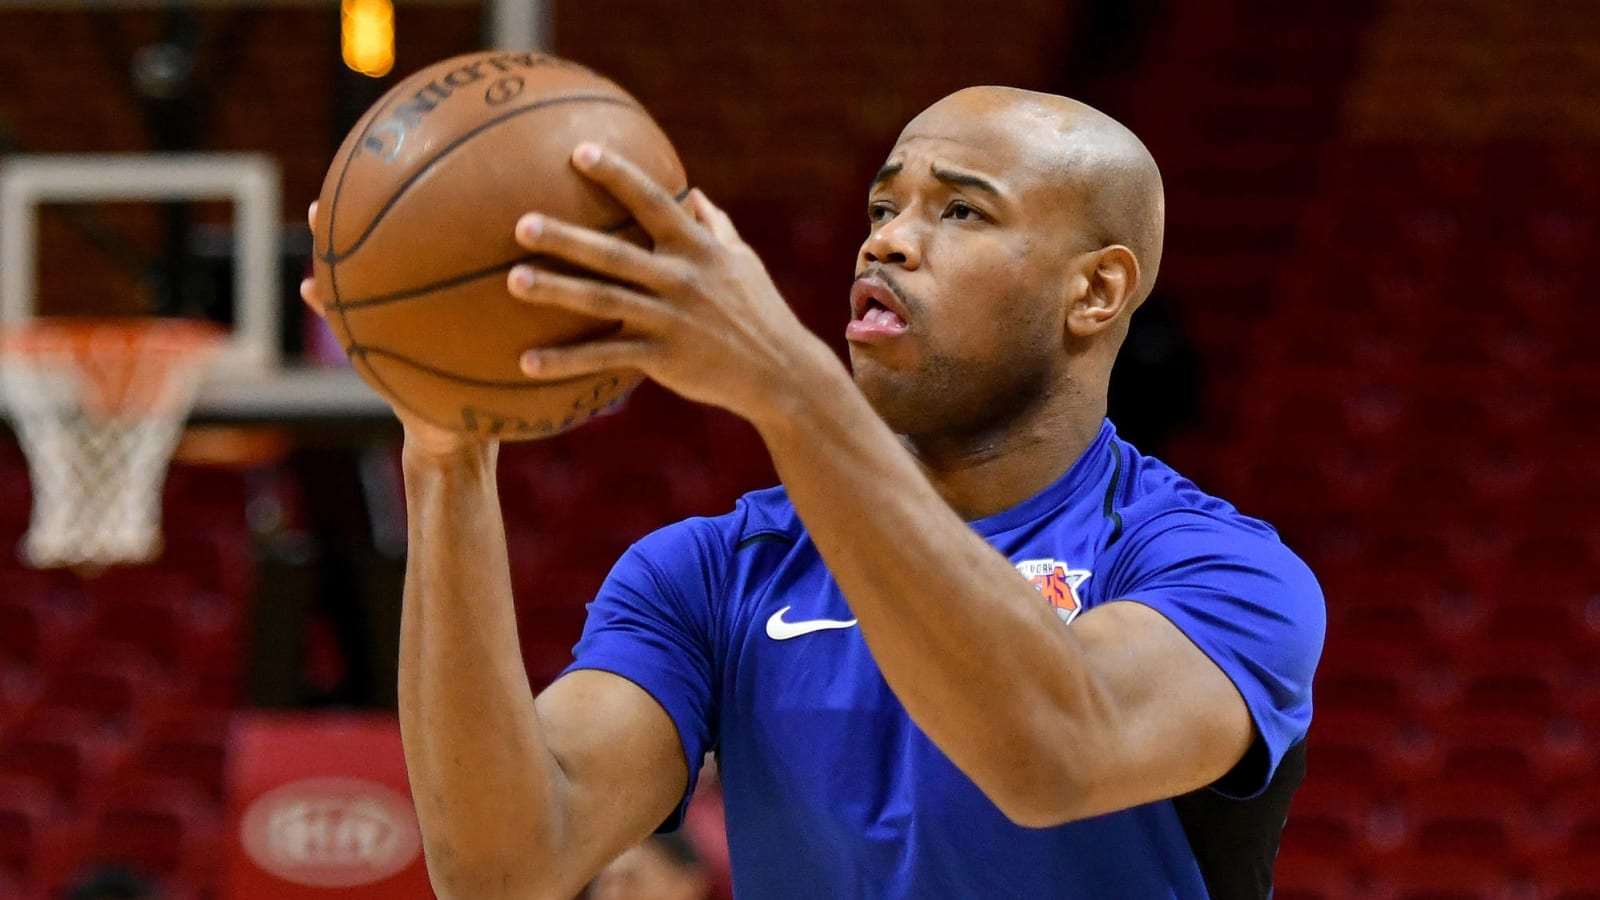 Basketball Forever - 34 year old Jarrett Jack with a TRIPLE DOUBLE! 16  points, 10 rebounds, 10 assists, 2 steals! Who'd have thought?